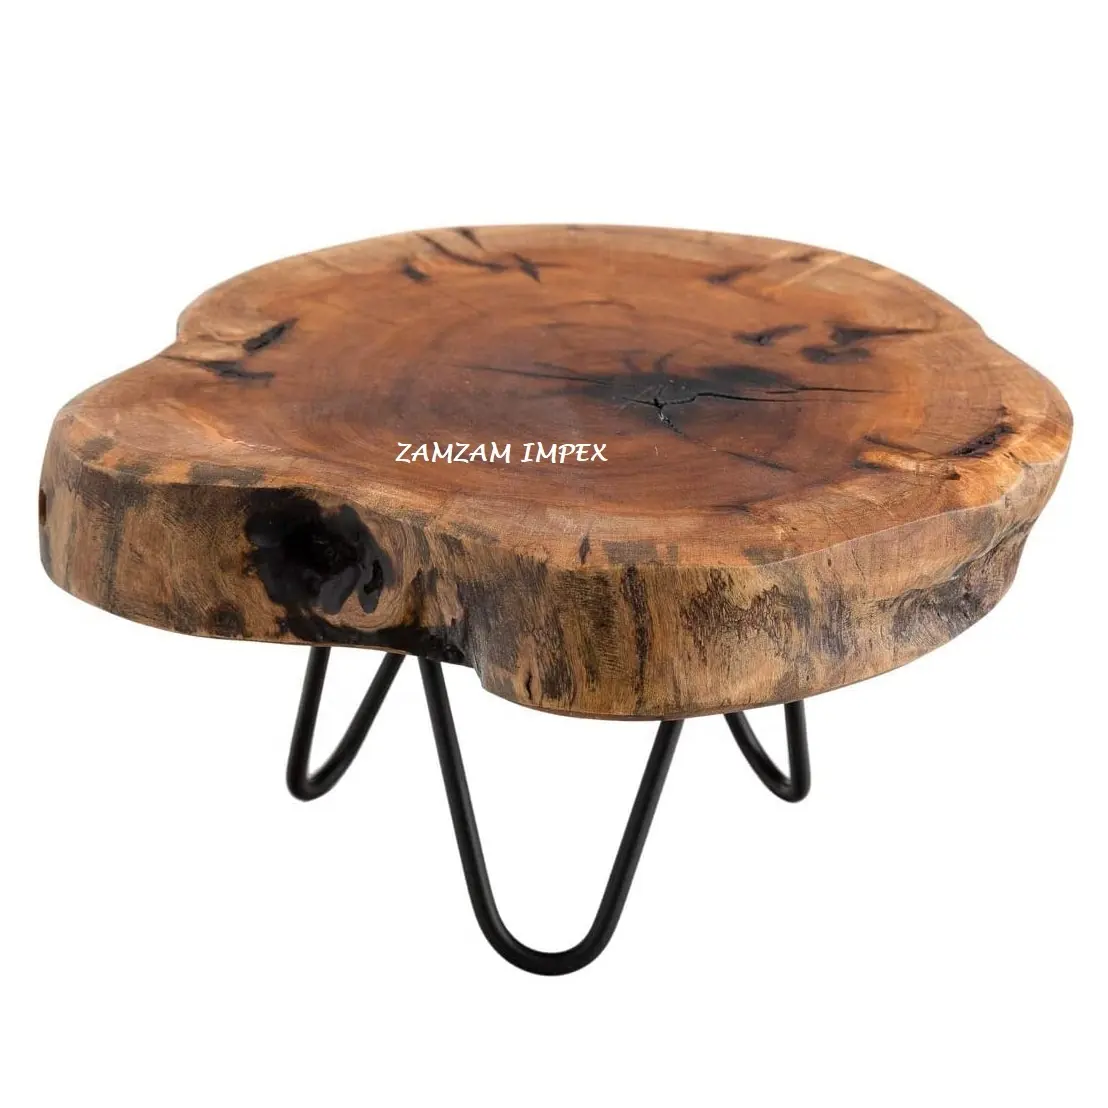 Natural Edge Tree Trunk Wooden Stand with Hairpin Legs for Displaying Cakes, Plants, Candles, Decor